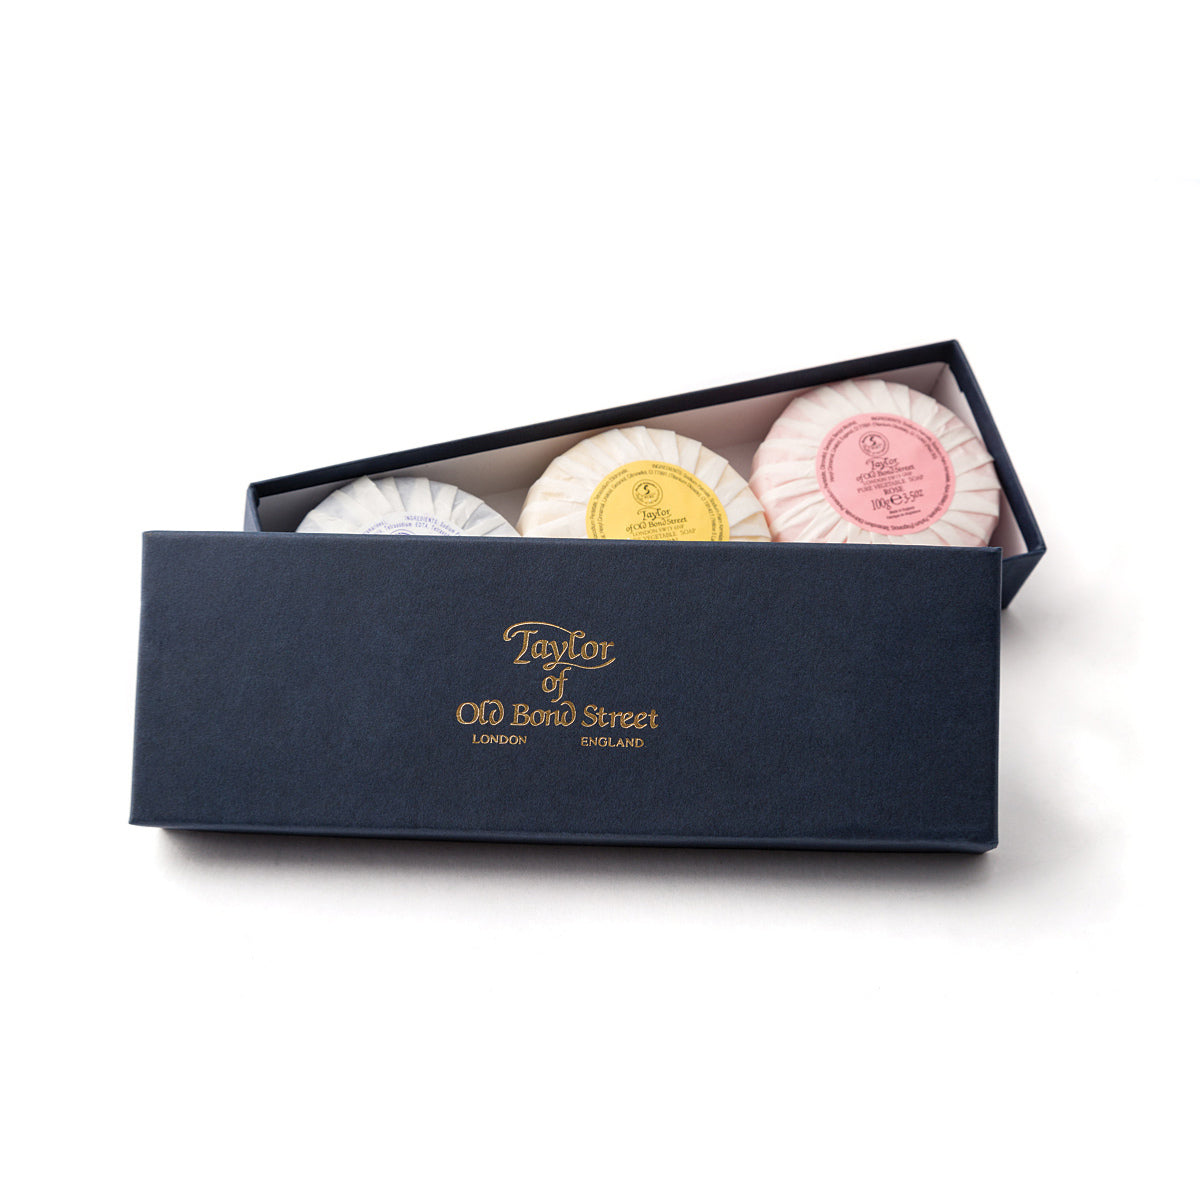 Taylor of Old Bond Street Mixed Hand Soap Gift Box - Cyril R. Salter